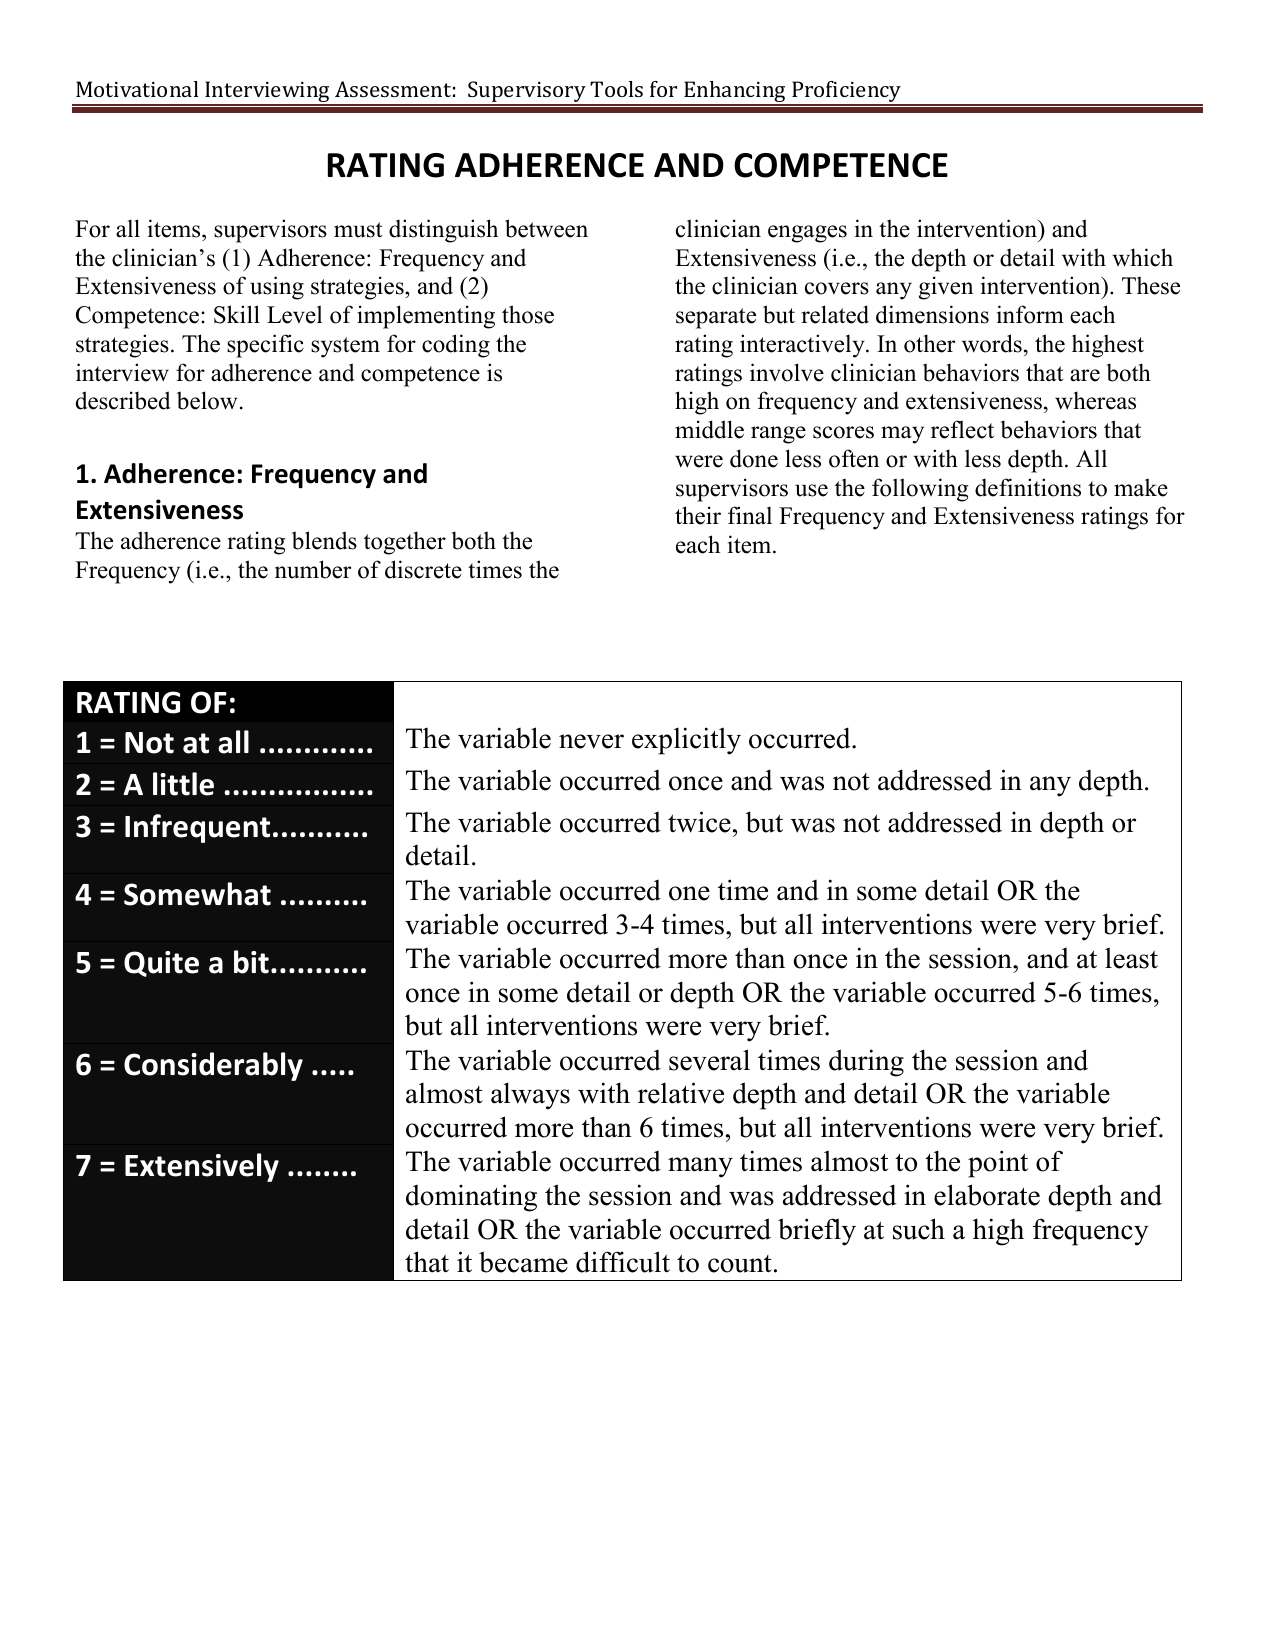 Inst 18 R2 Motivational Interviewing Rating Adherence Worksheet